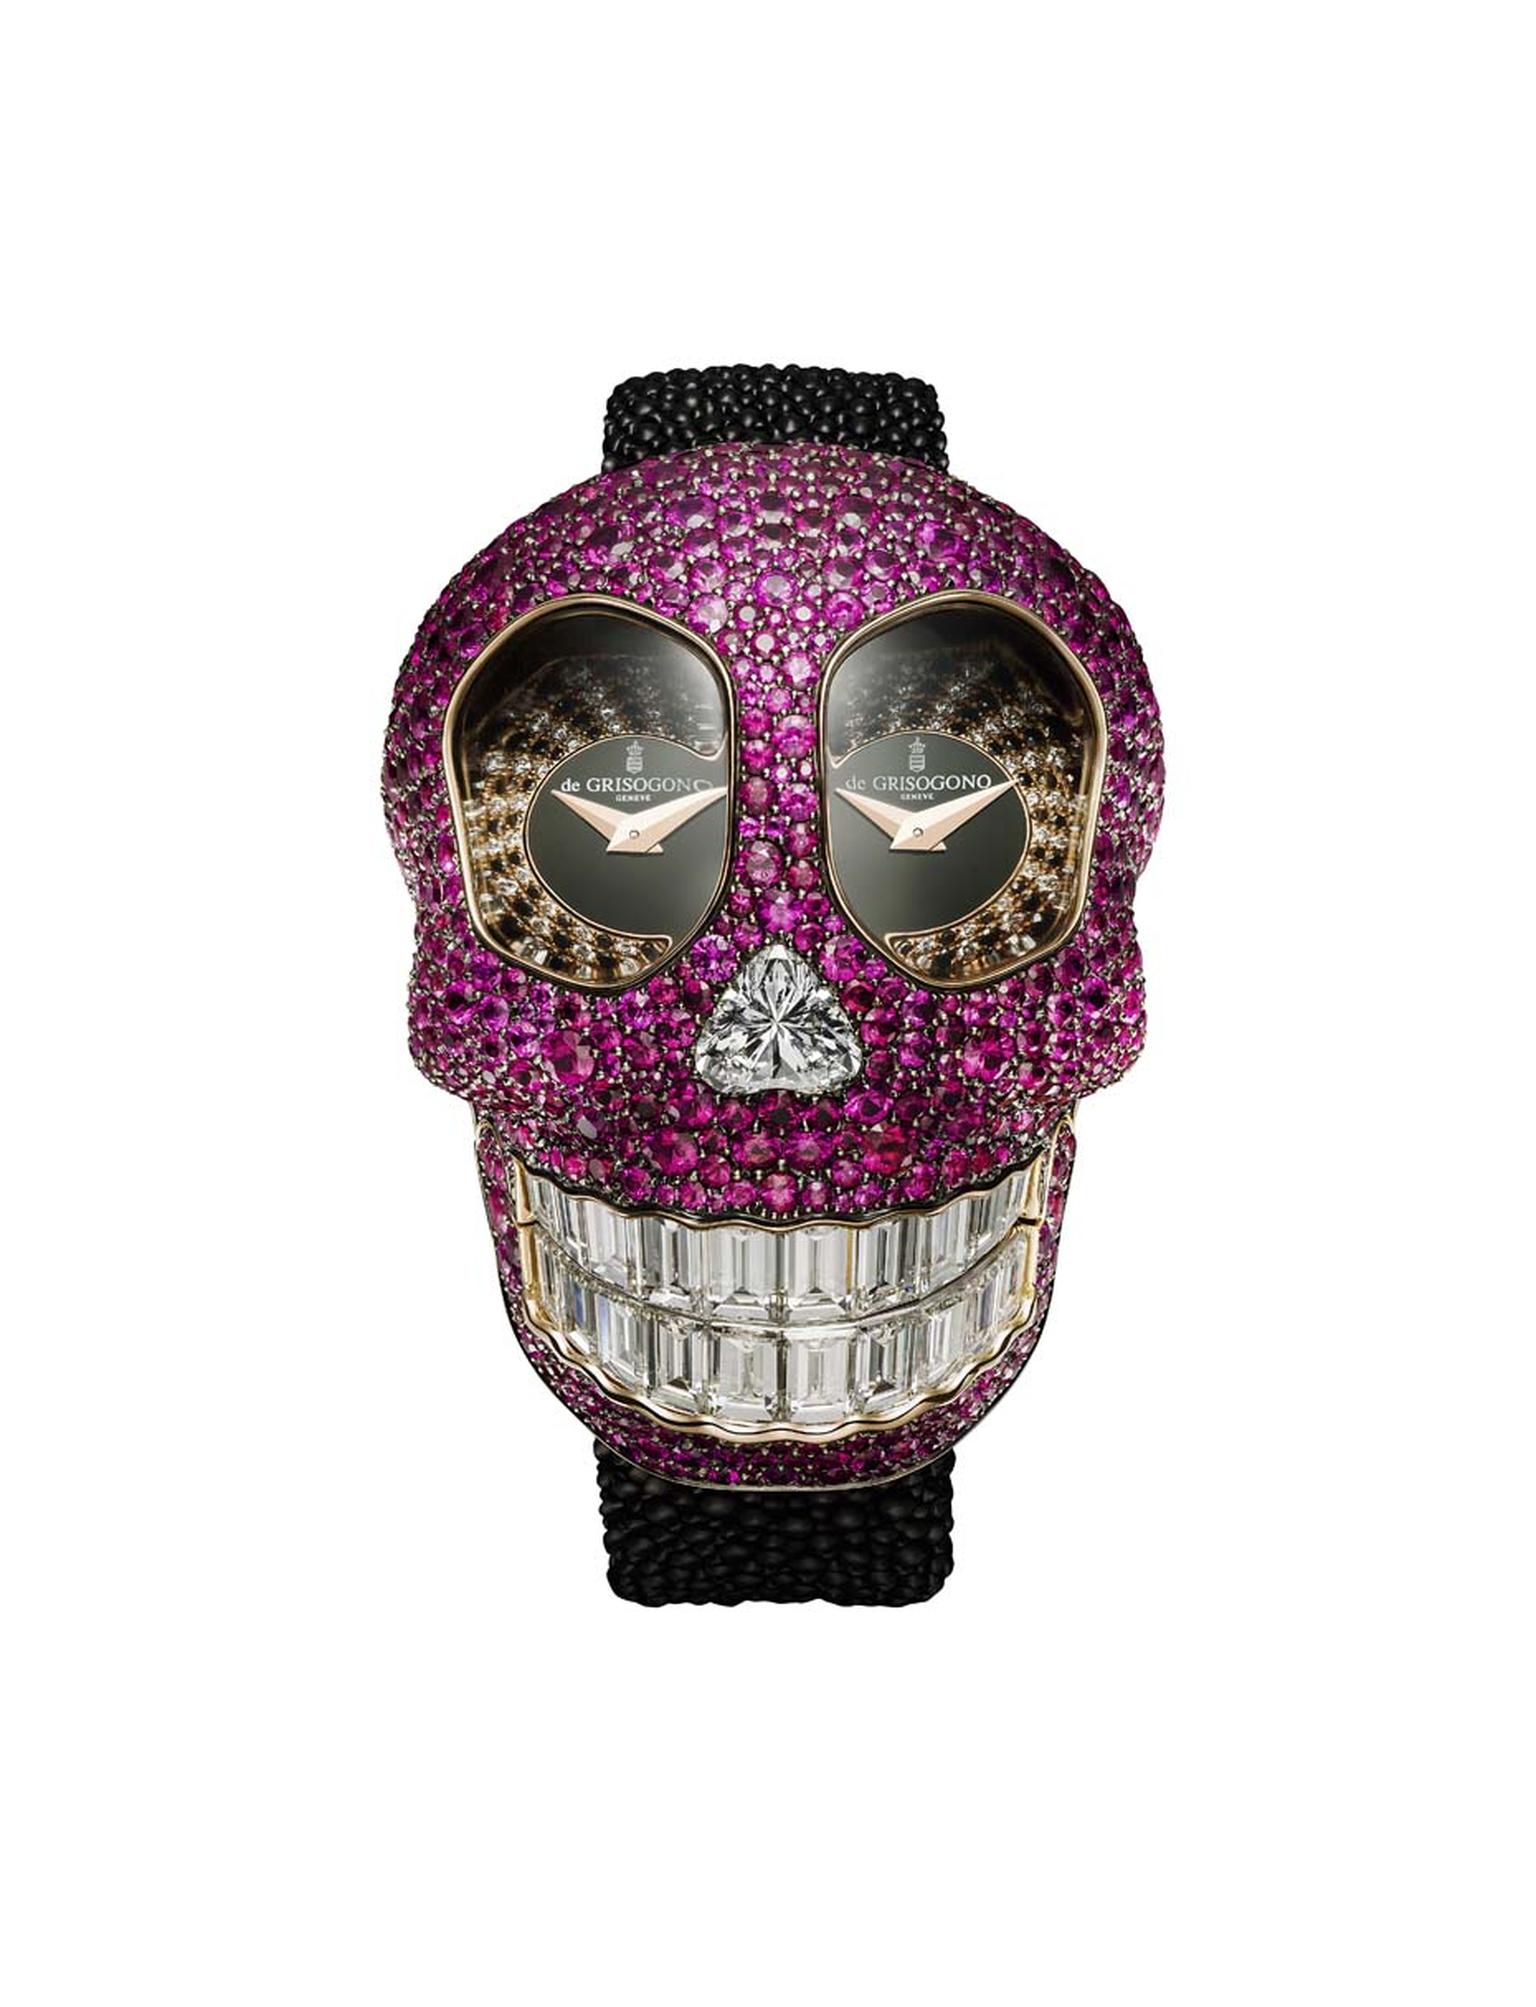 The cavernous eye wells of de GRISOGONO's new Crazy Skull high jewellery watch are set with a hypnotic spiral of black and white diamonds, which draw the eye to the two separate dials - a clever way to display the dual time zones.